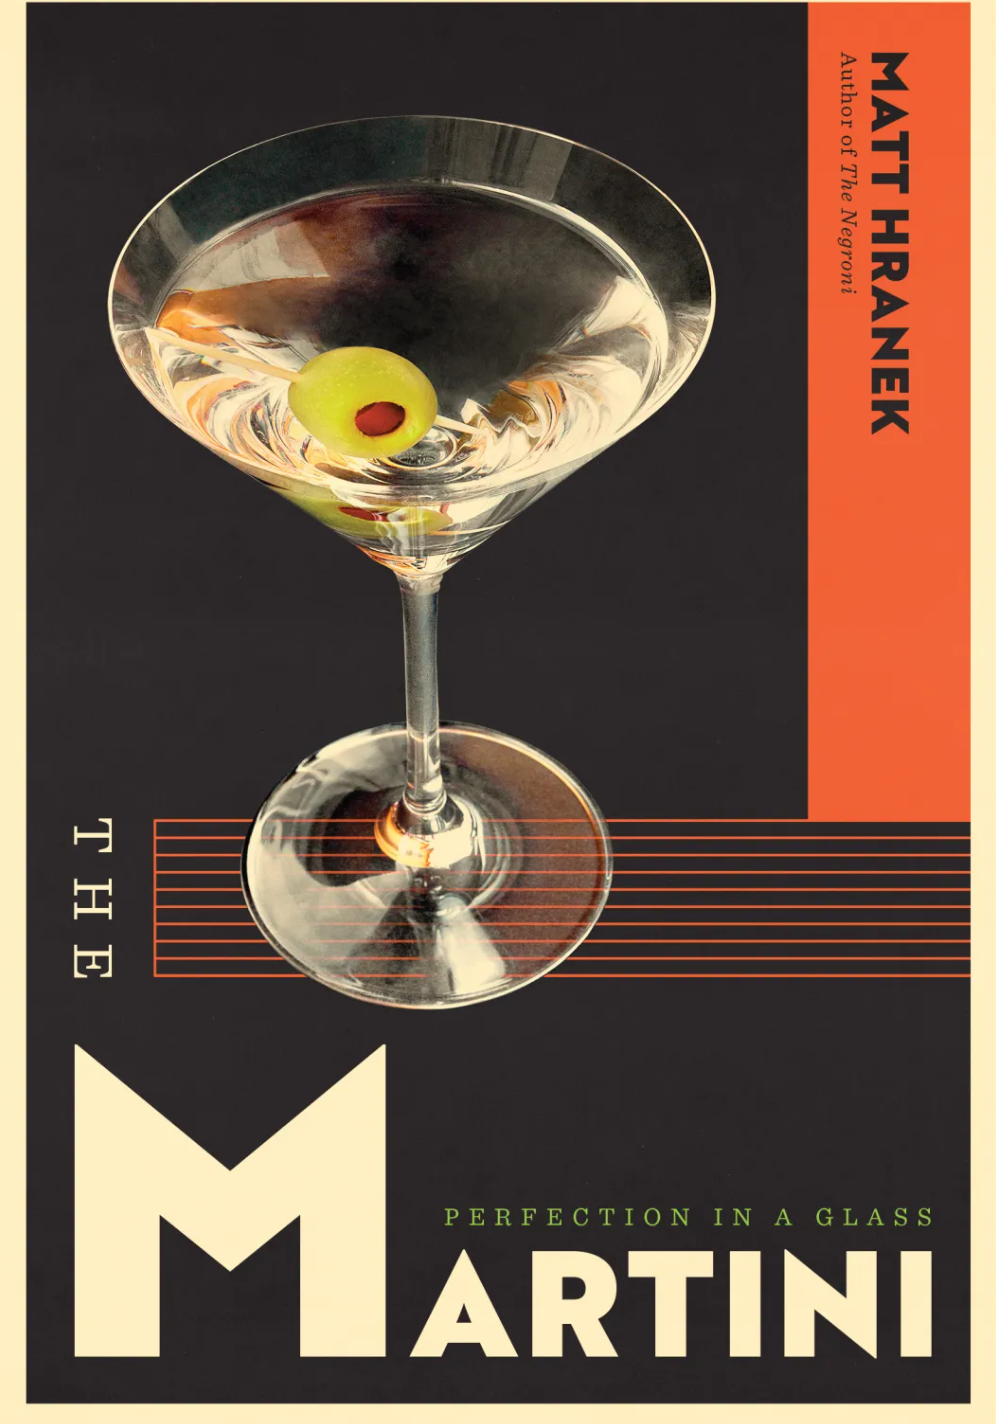 MARTINI: PERFECTION IN A GLASS